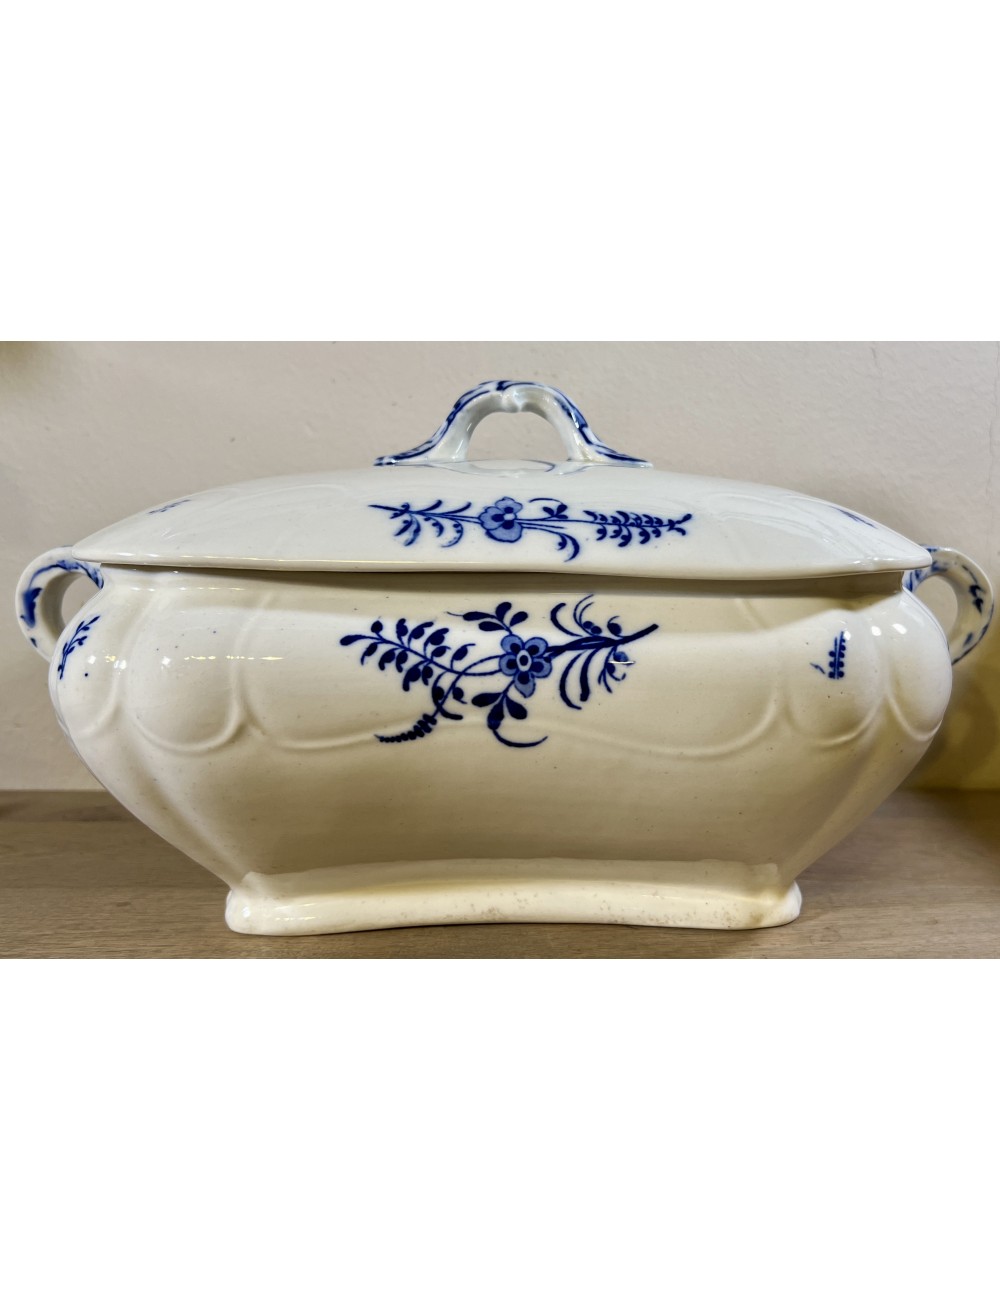 Soup tureen / Deck dish - rectangular, higher, model - Brown, Westhead Moore & Co. - décor CHANTILLY executed in blue